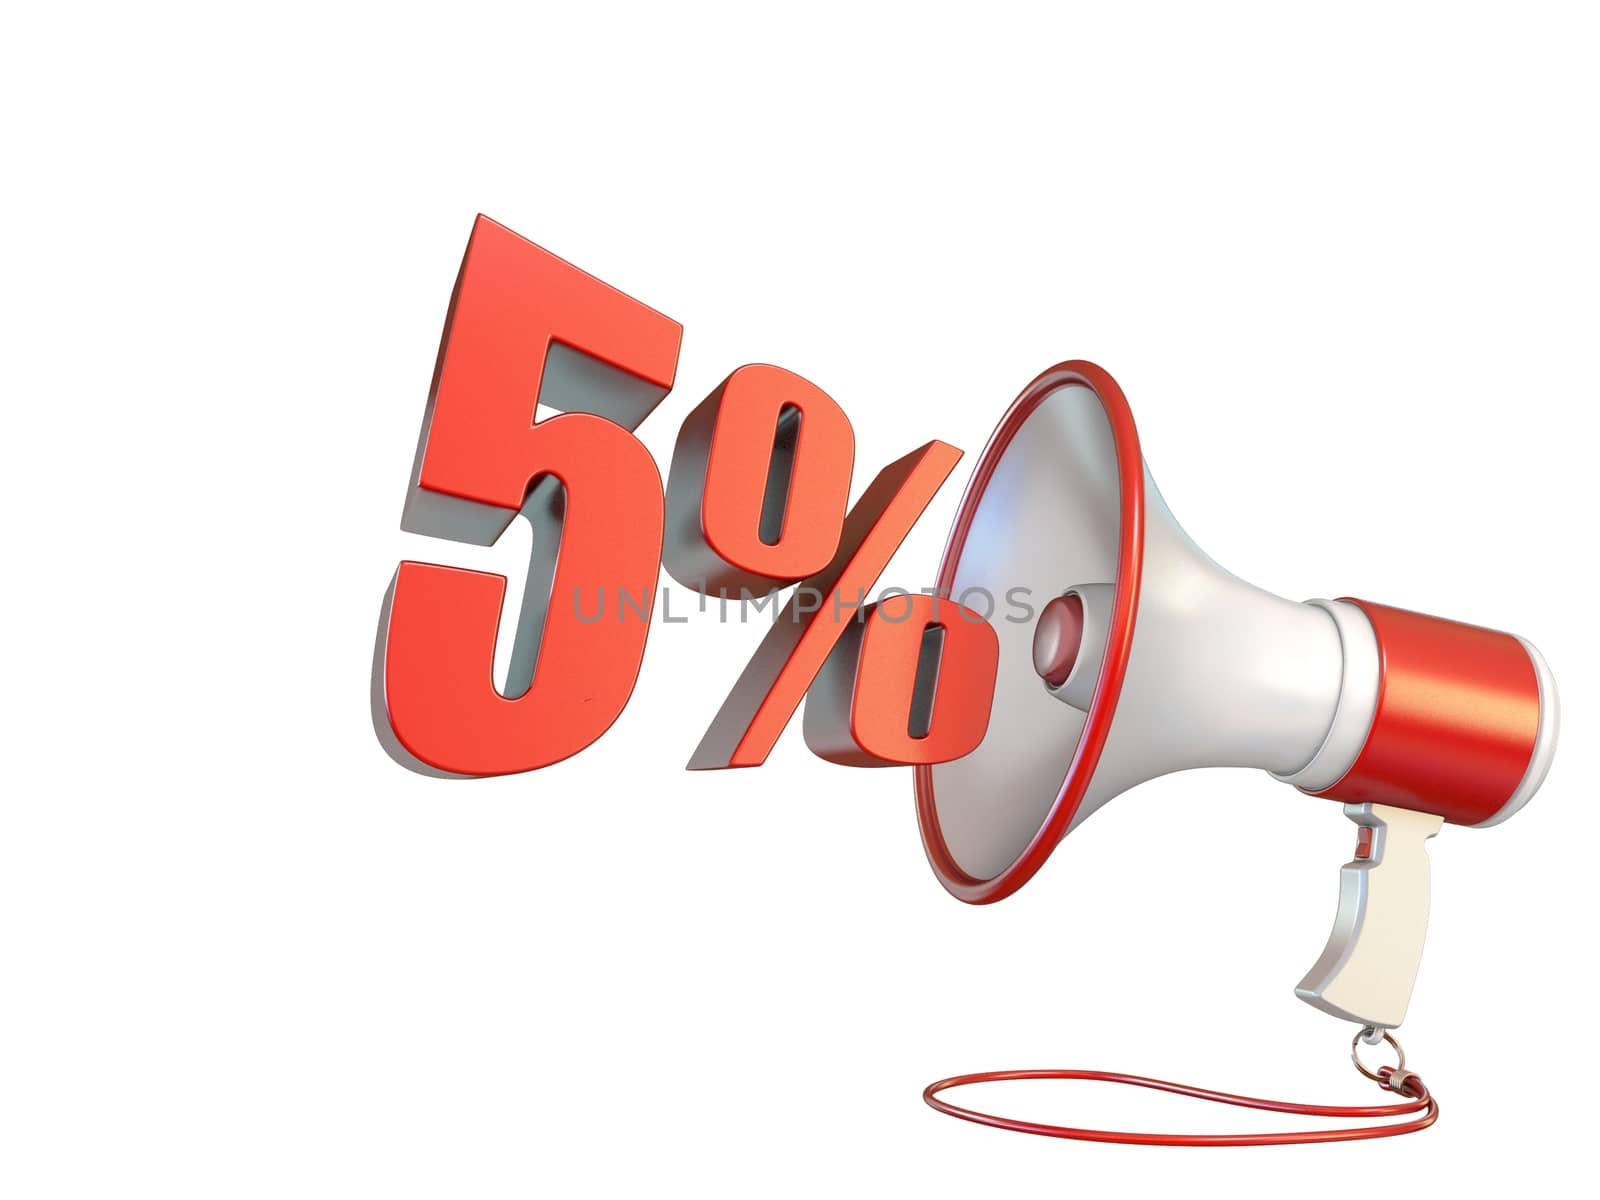 5 percent sign and megaphone 3D rendering illustration isolated on white background